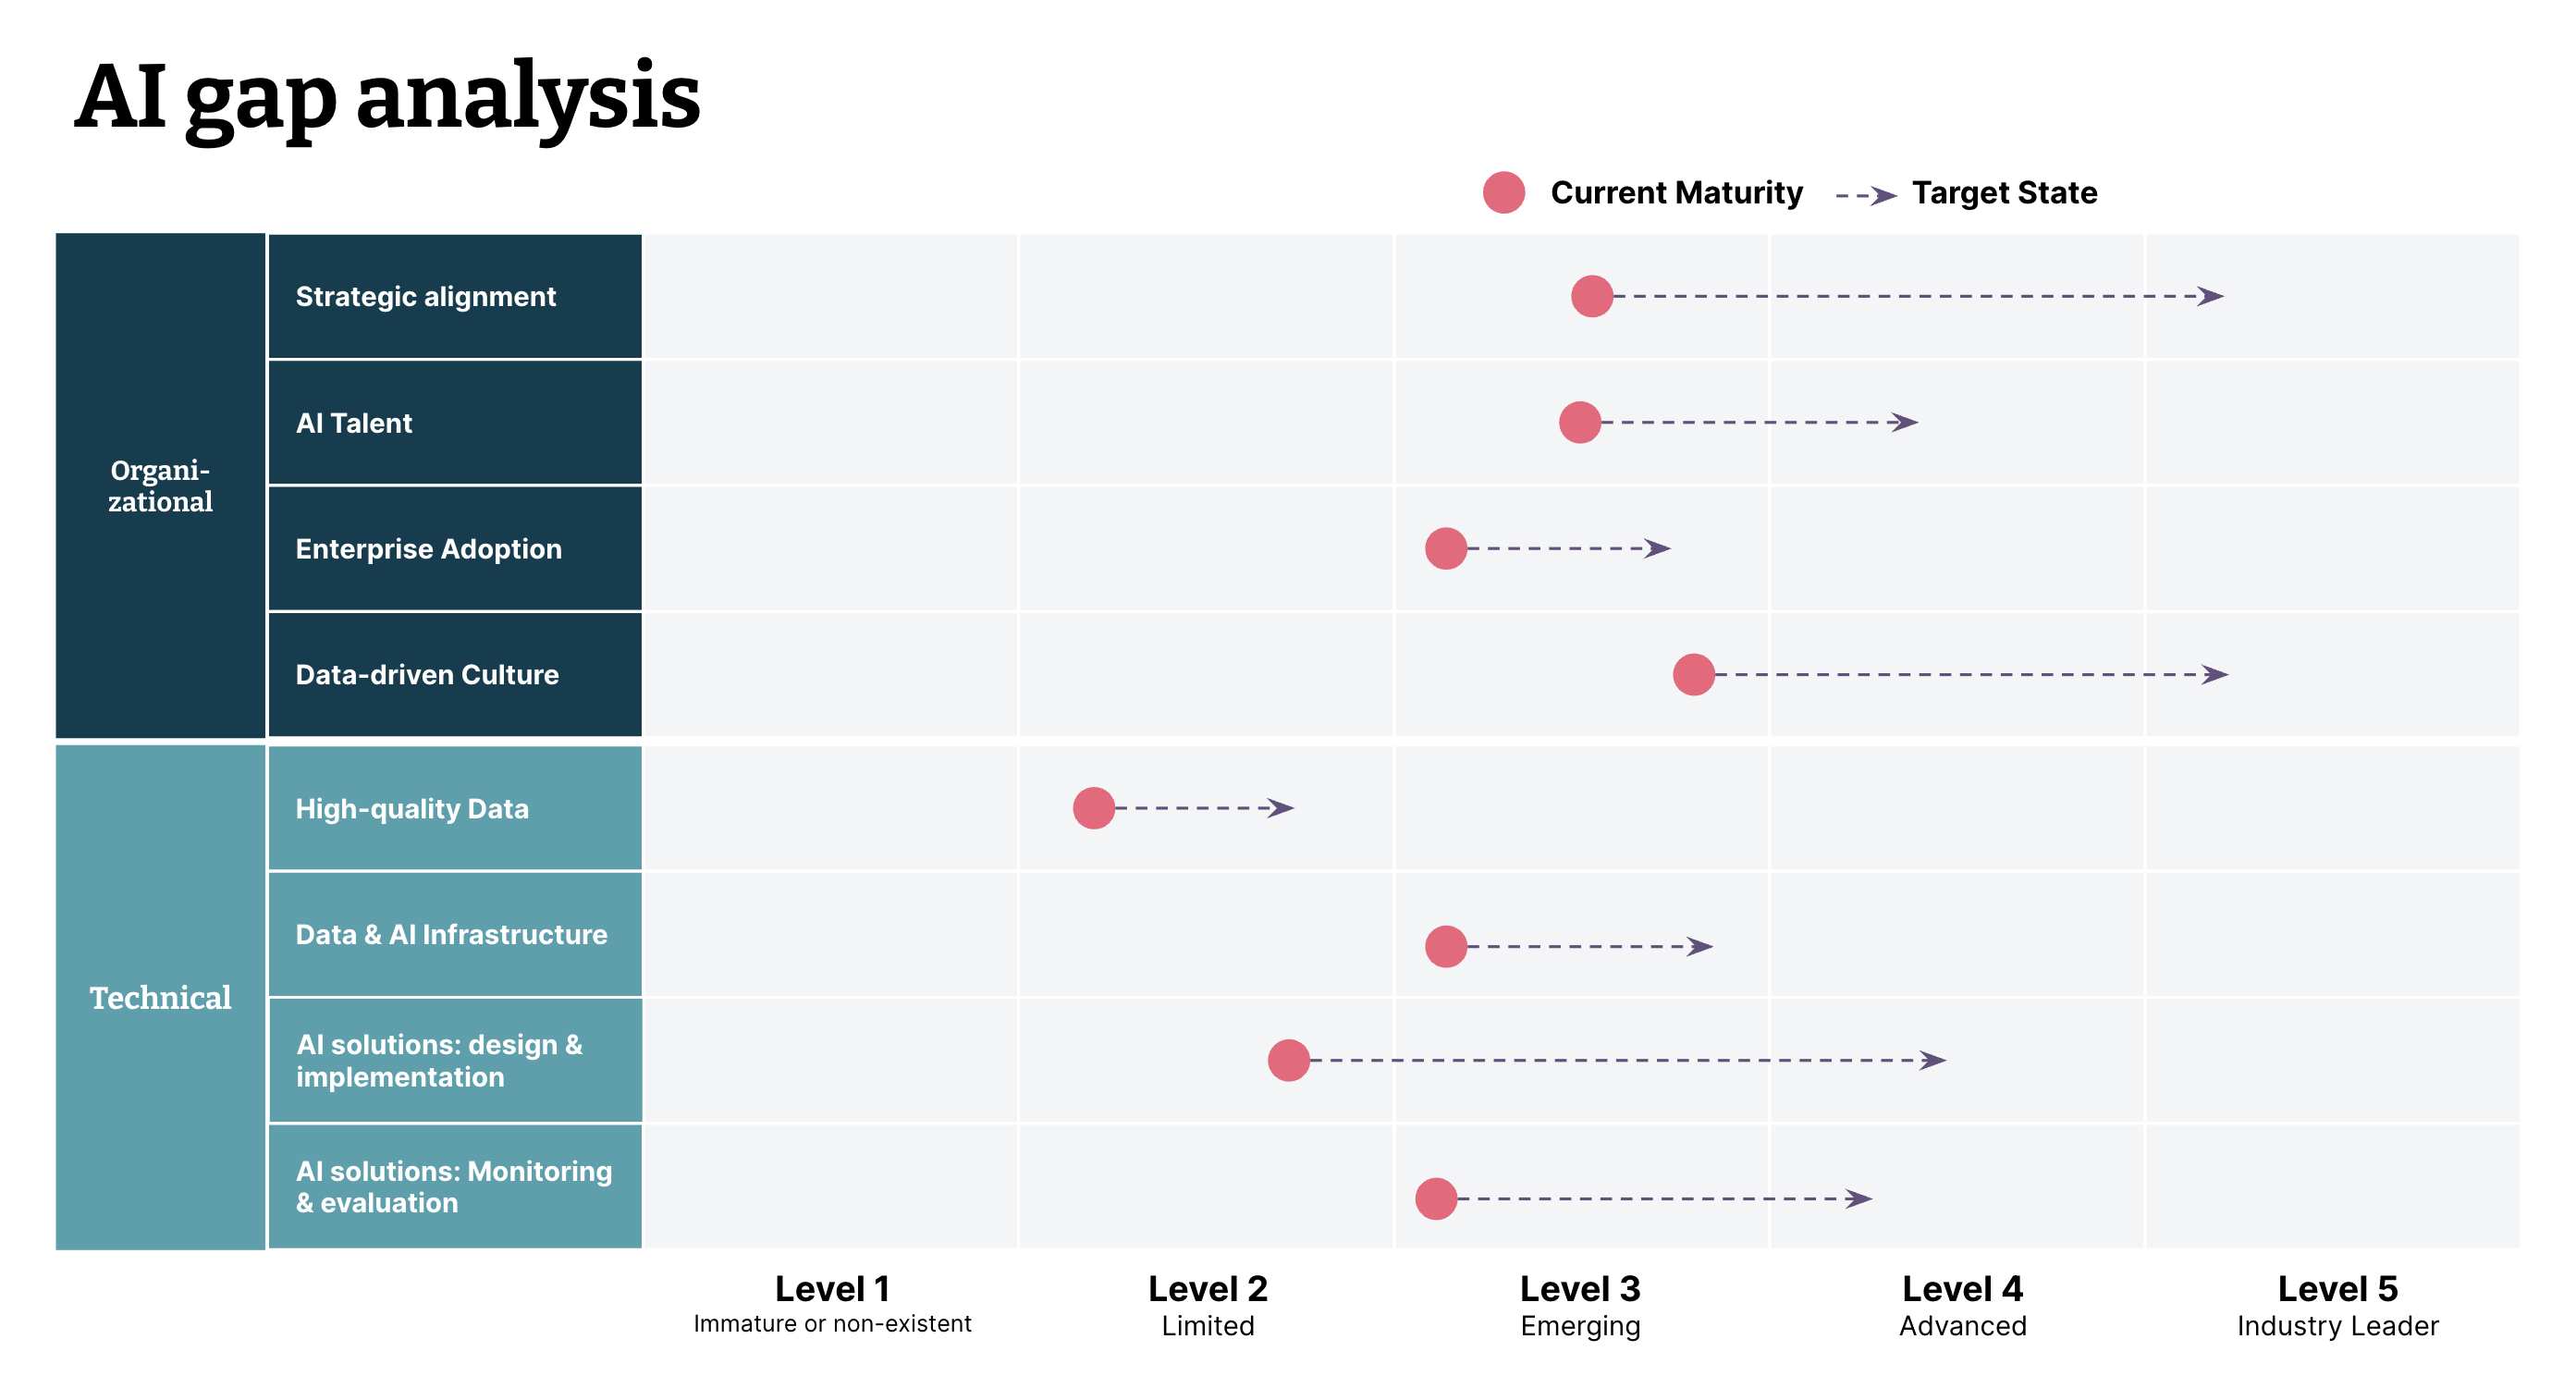 Diagram that shows the comprehensive framework developed at Thoughtworks for an effective AI gap analysis. It assesses AI maturity and identifies gaps across important dimensions of value creation